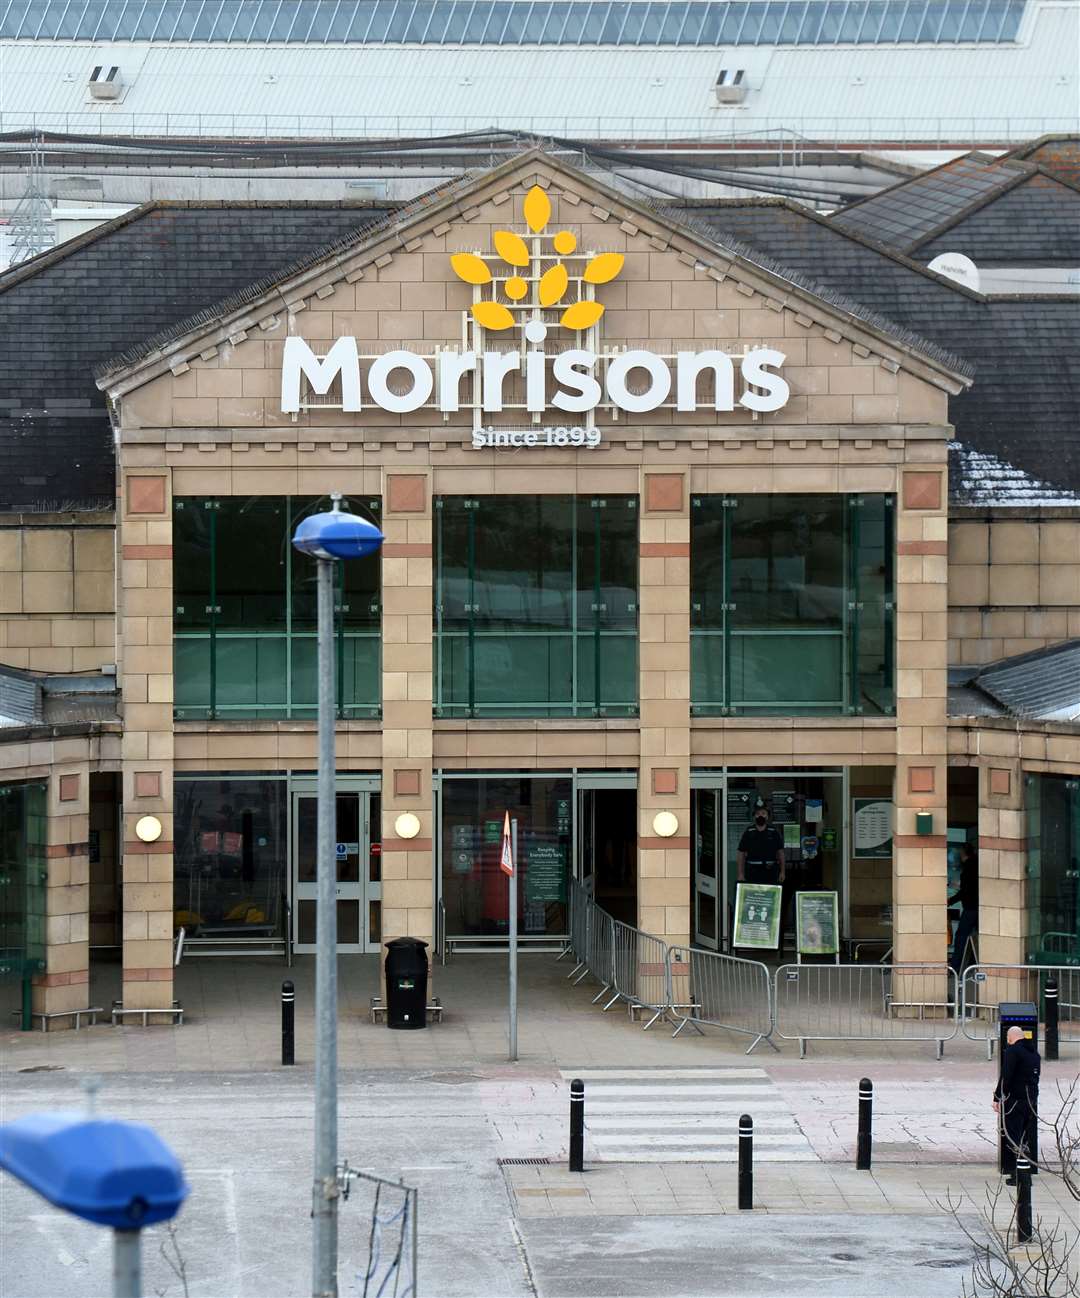 One of the incidents took place at the Morrisons supermarket in Millburn Road, Inverness.